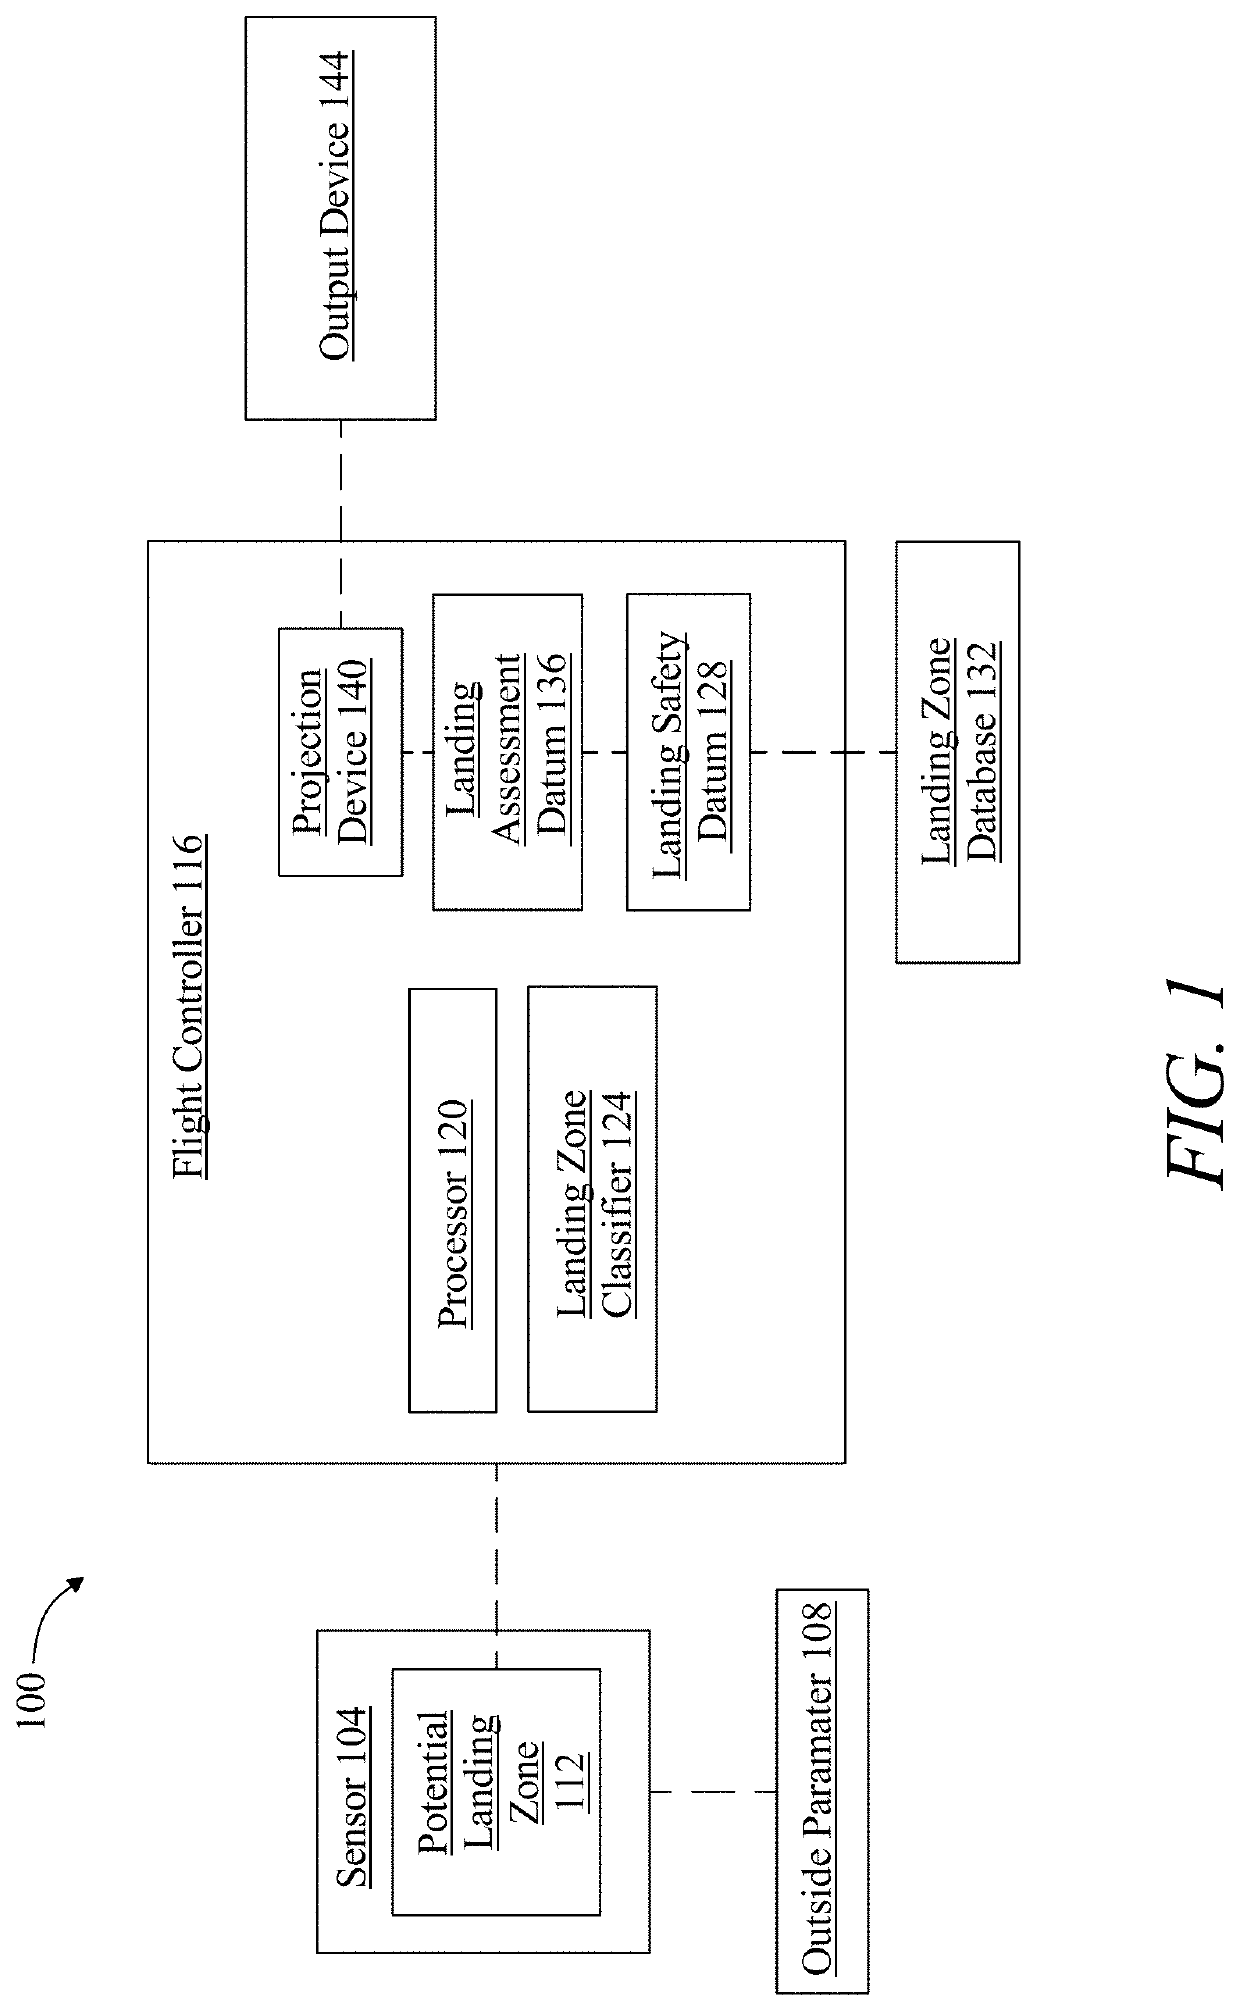 System for monitoring the landing zone of an electric vertical takeoff and landing aircraft